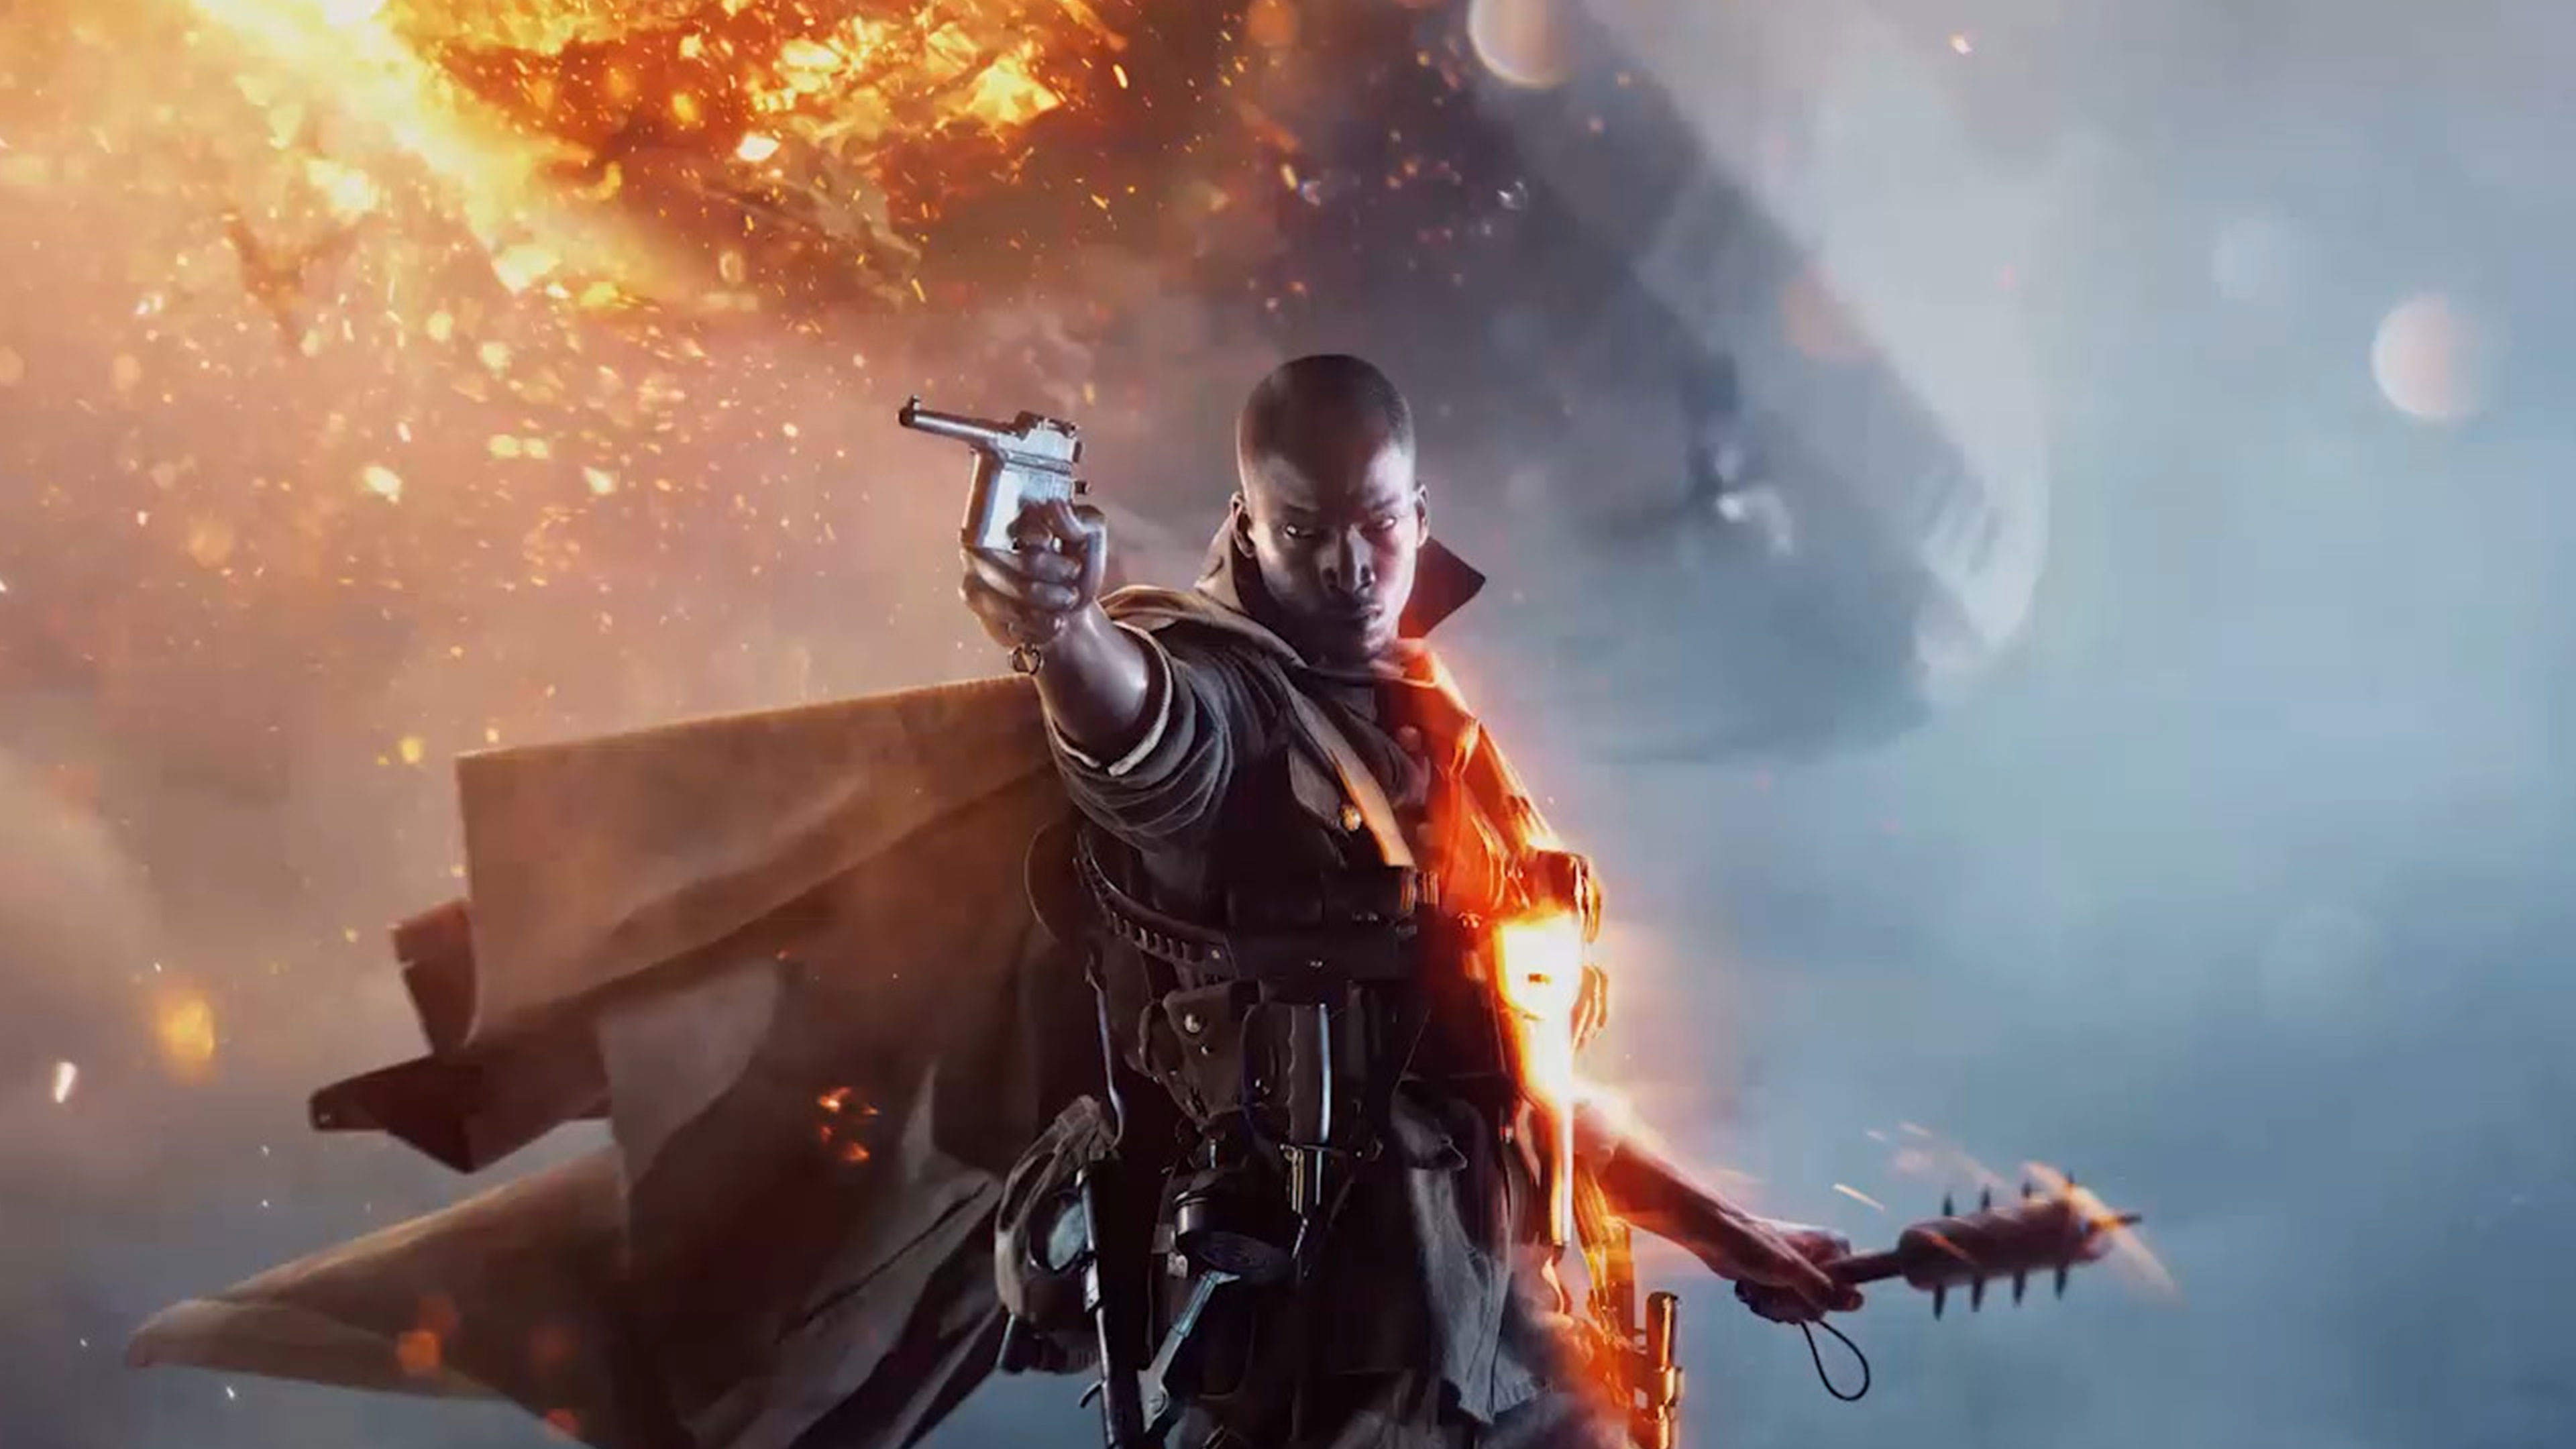 Battlefield 1 Gamescom Trailer “Really Starting to Come Together,” New